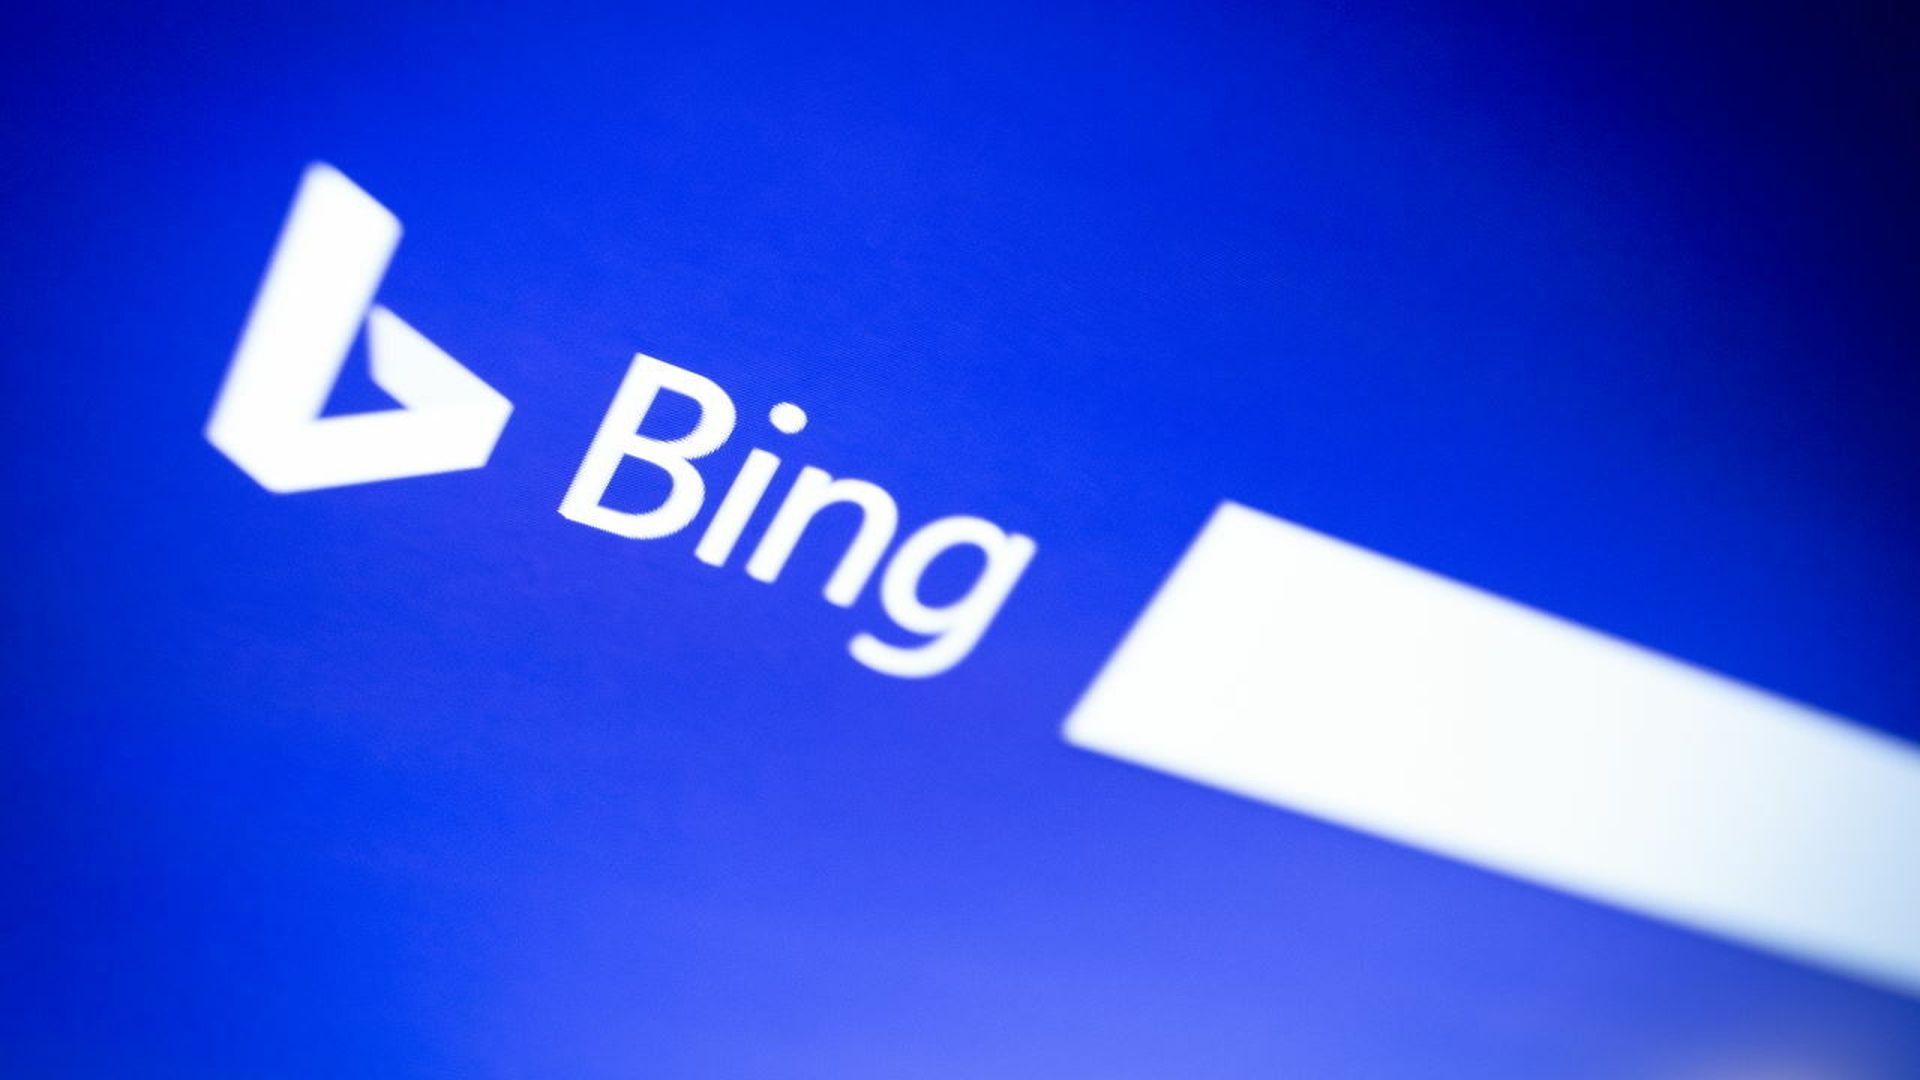 AI powered Bing search engine is introduced today by Microsoft